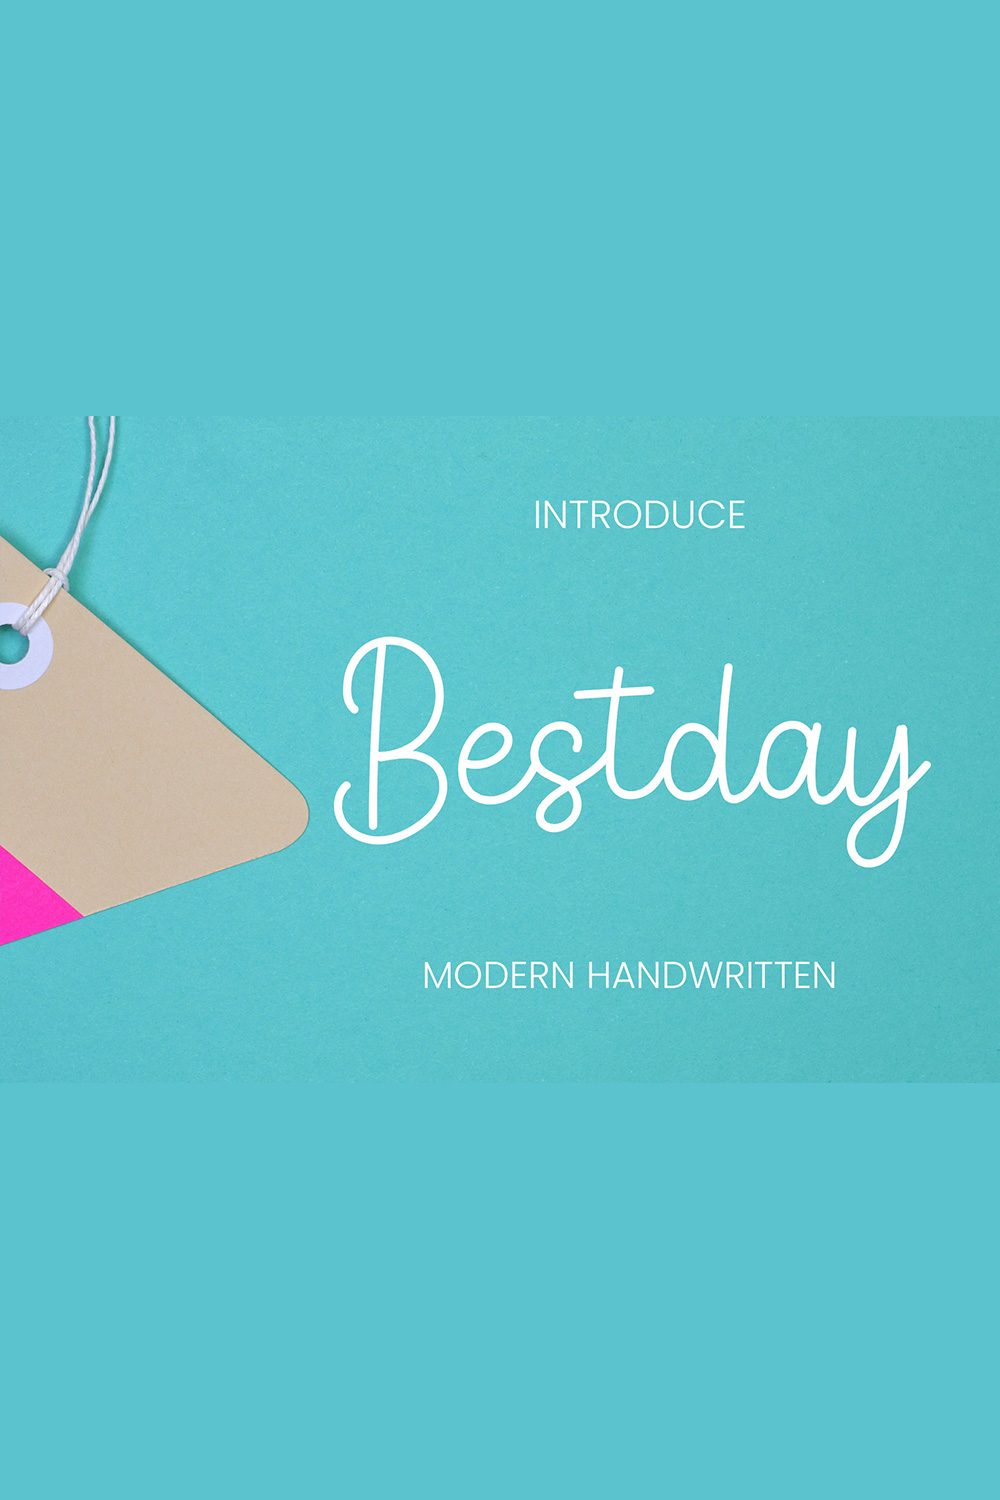 An image with text showing the unique Bestday font